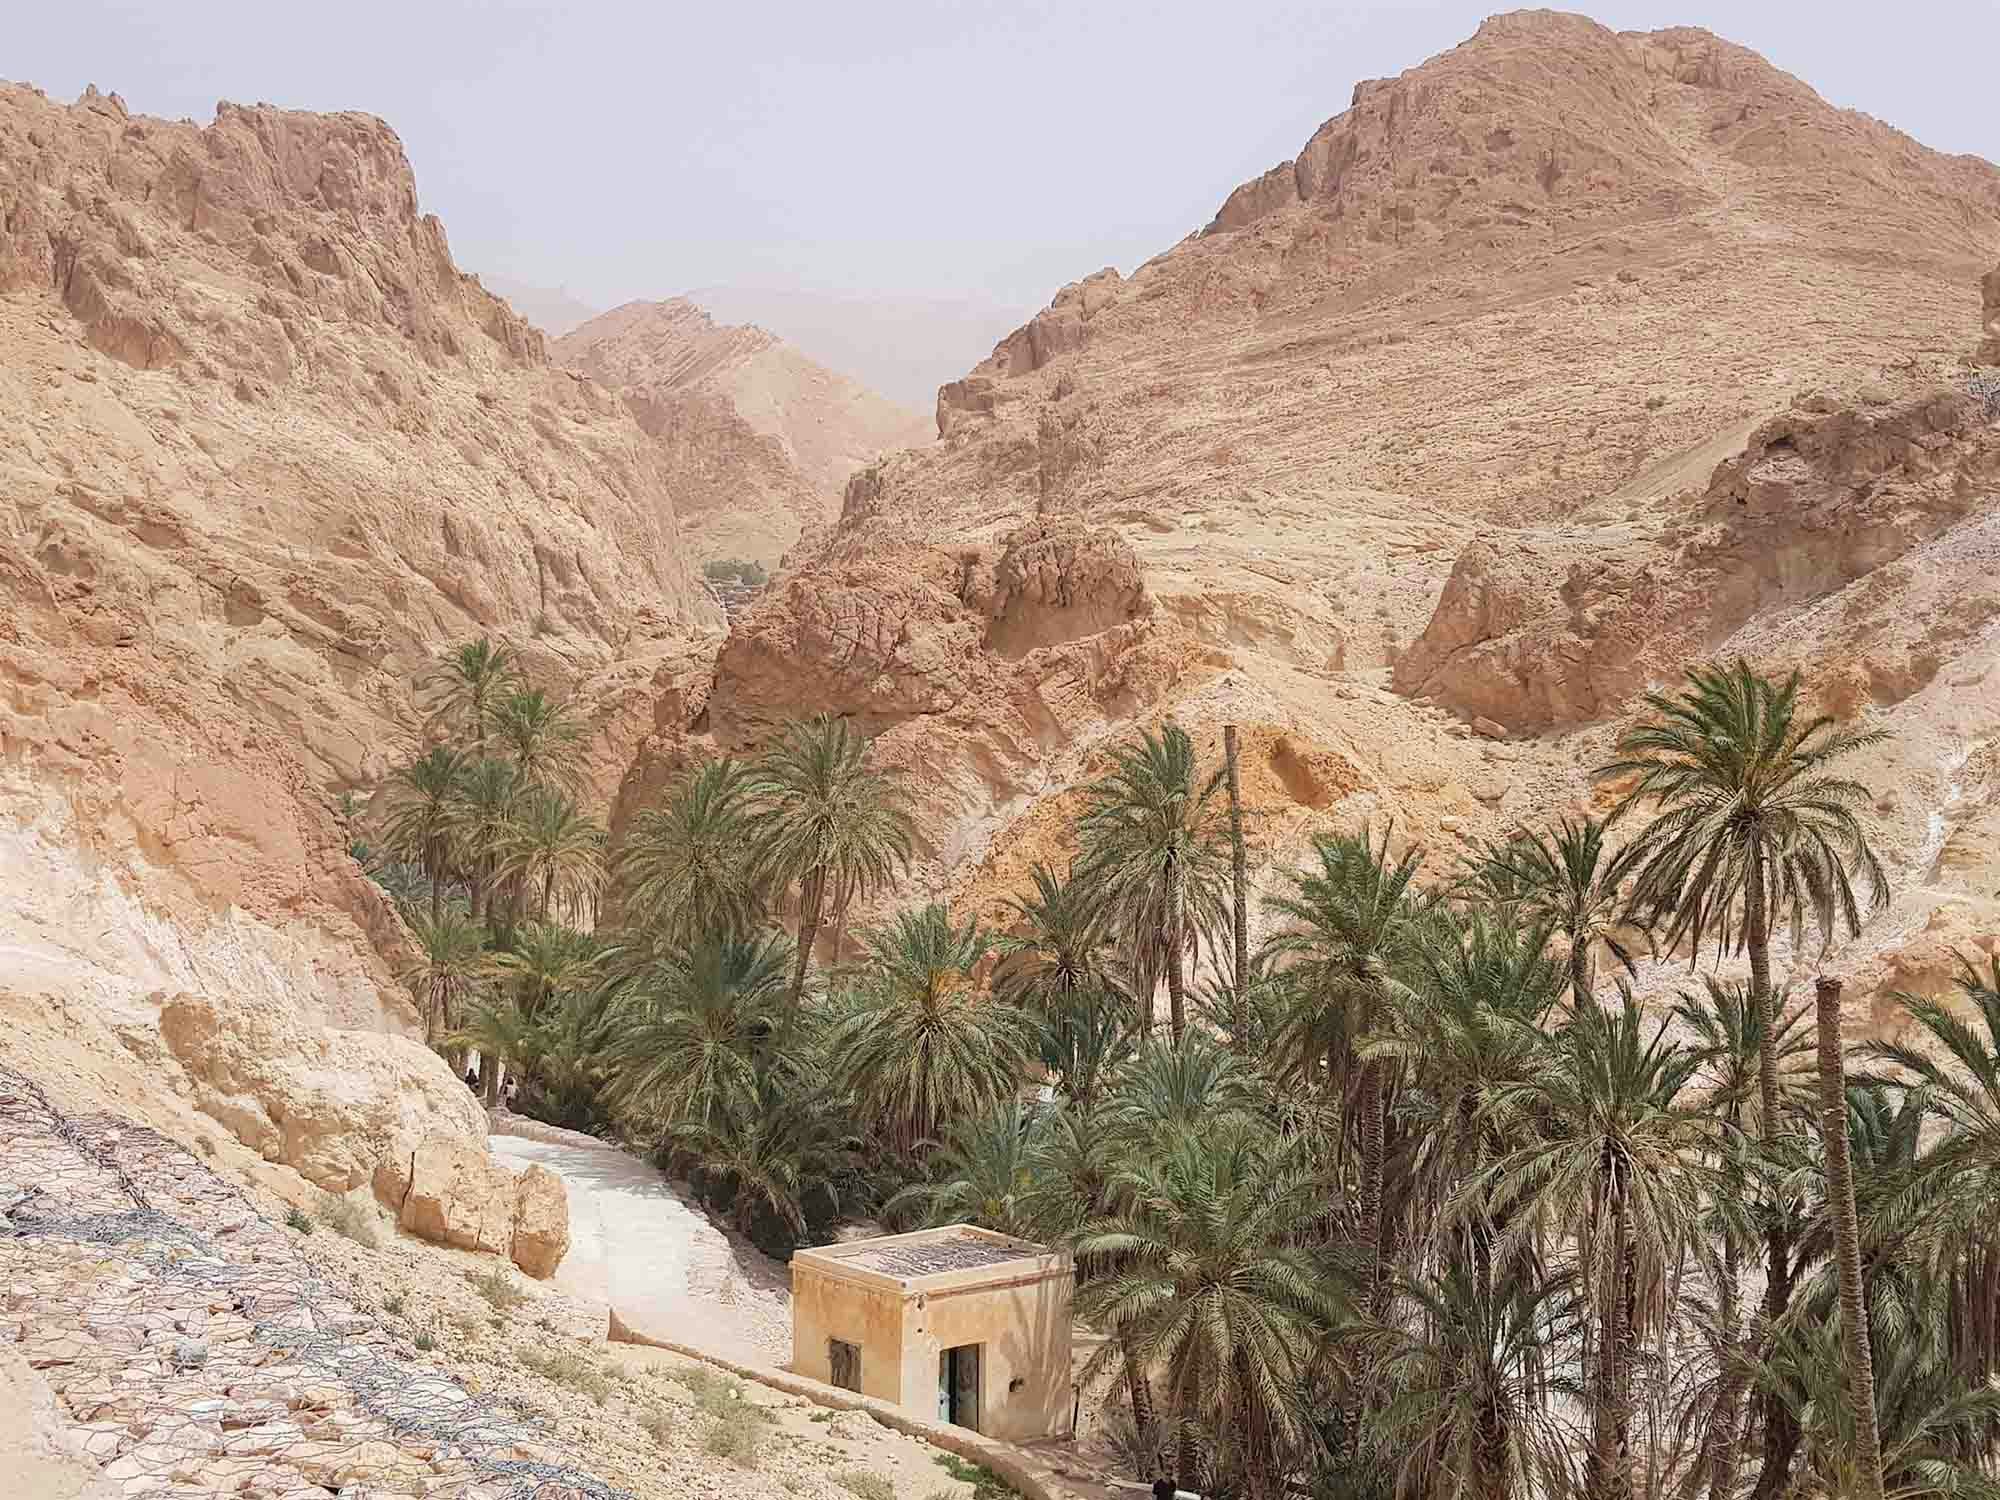 Visit ther jaw-dropping canyons of Tamerza